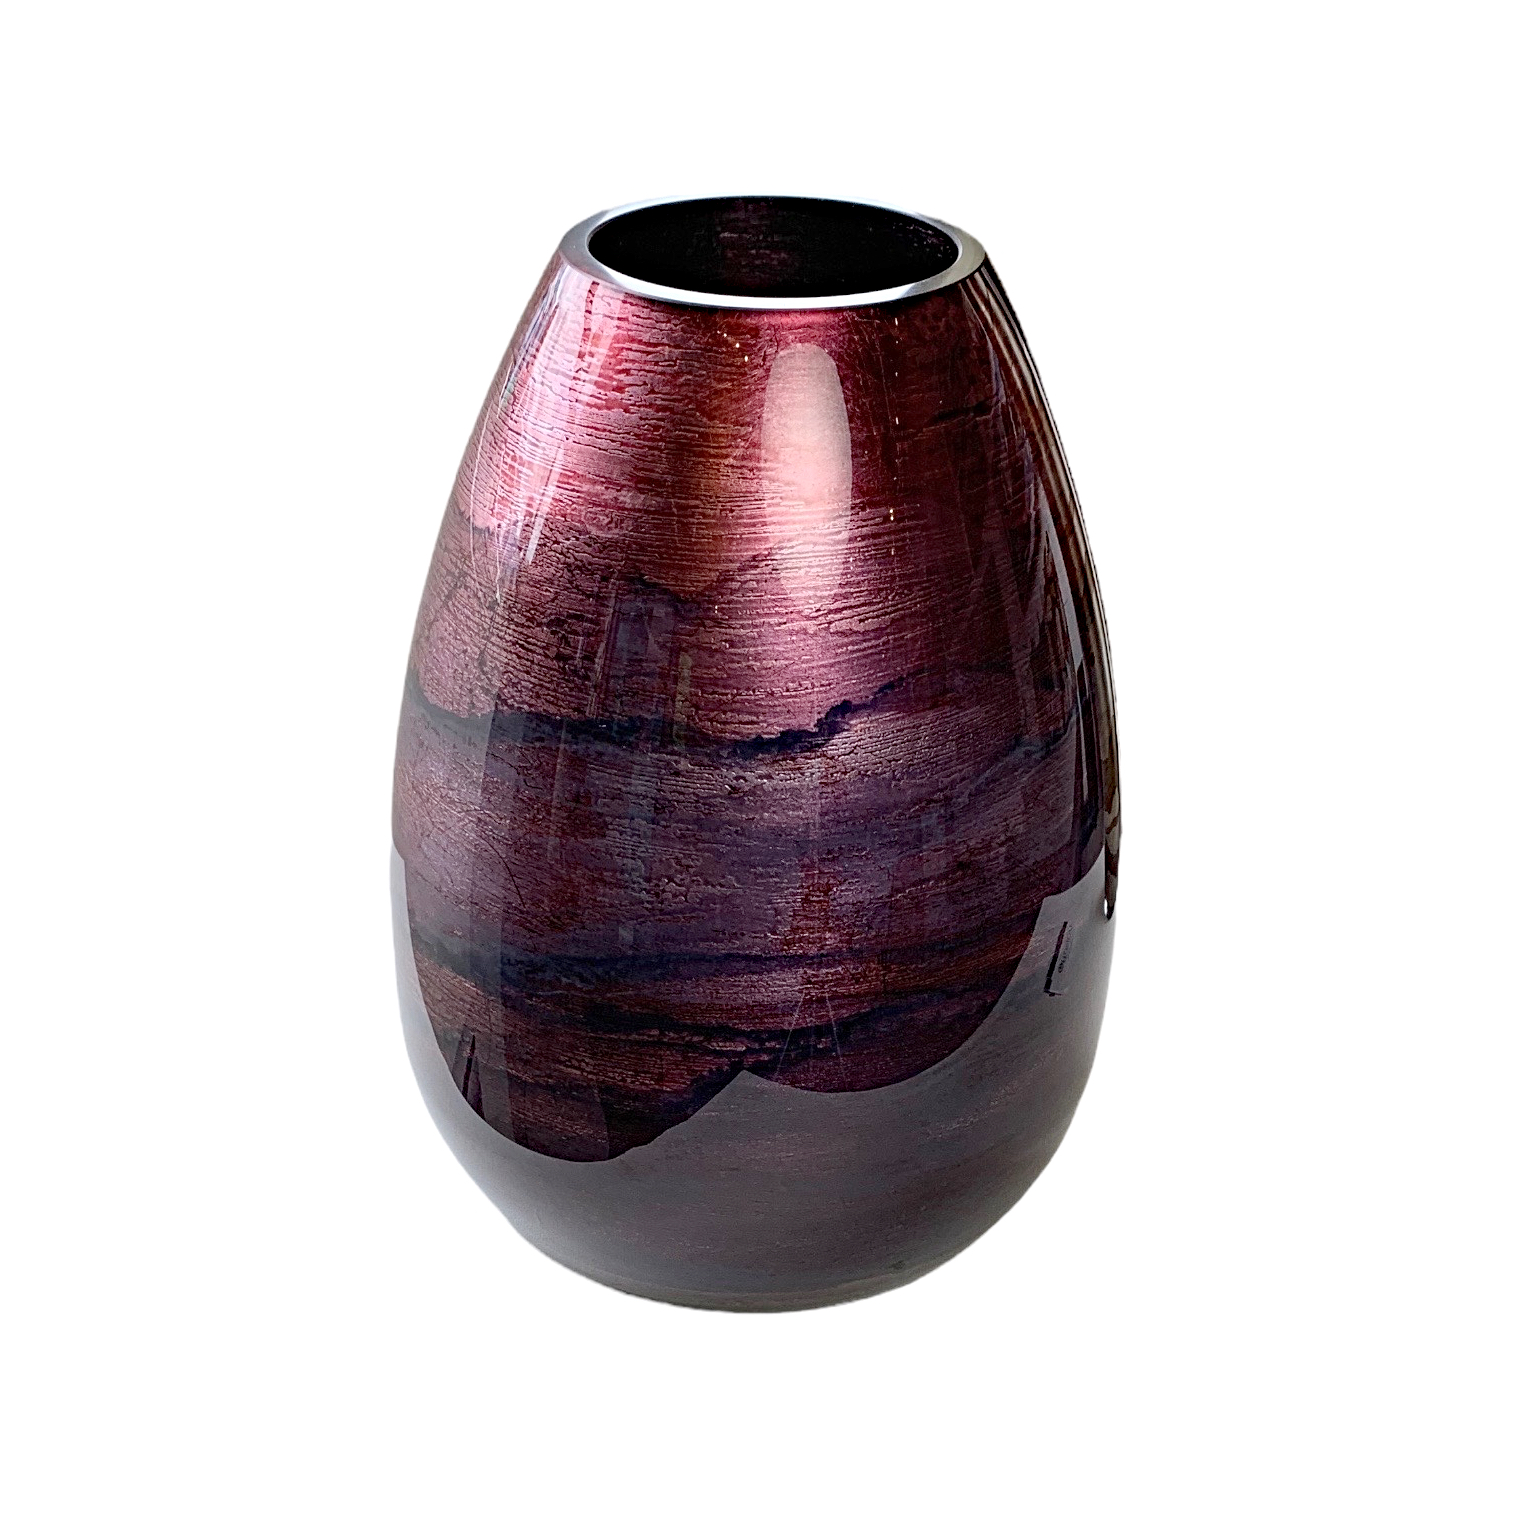 One-of-a-kind hand-gilded glass vase by David Graff | Effusion Art Gallery + Cast Glass Studio, Invermere BC